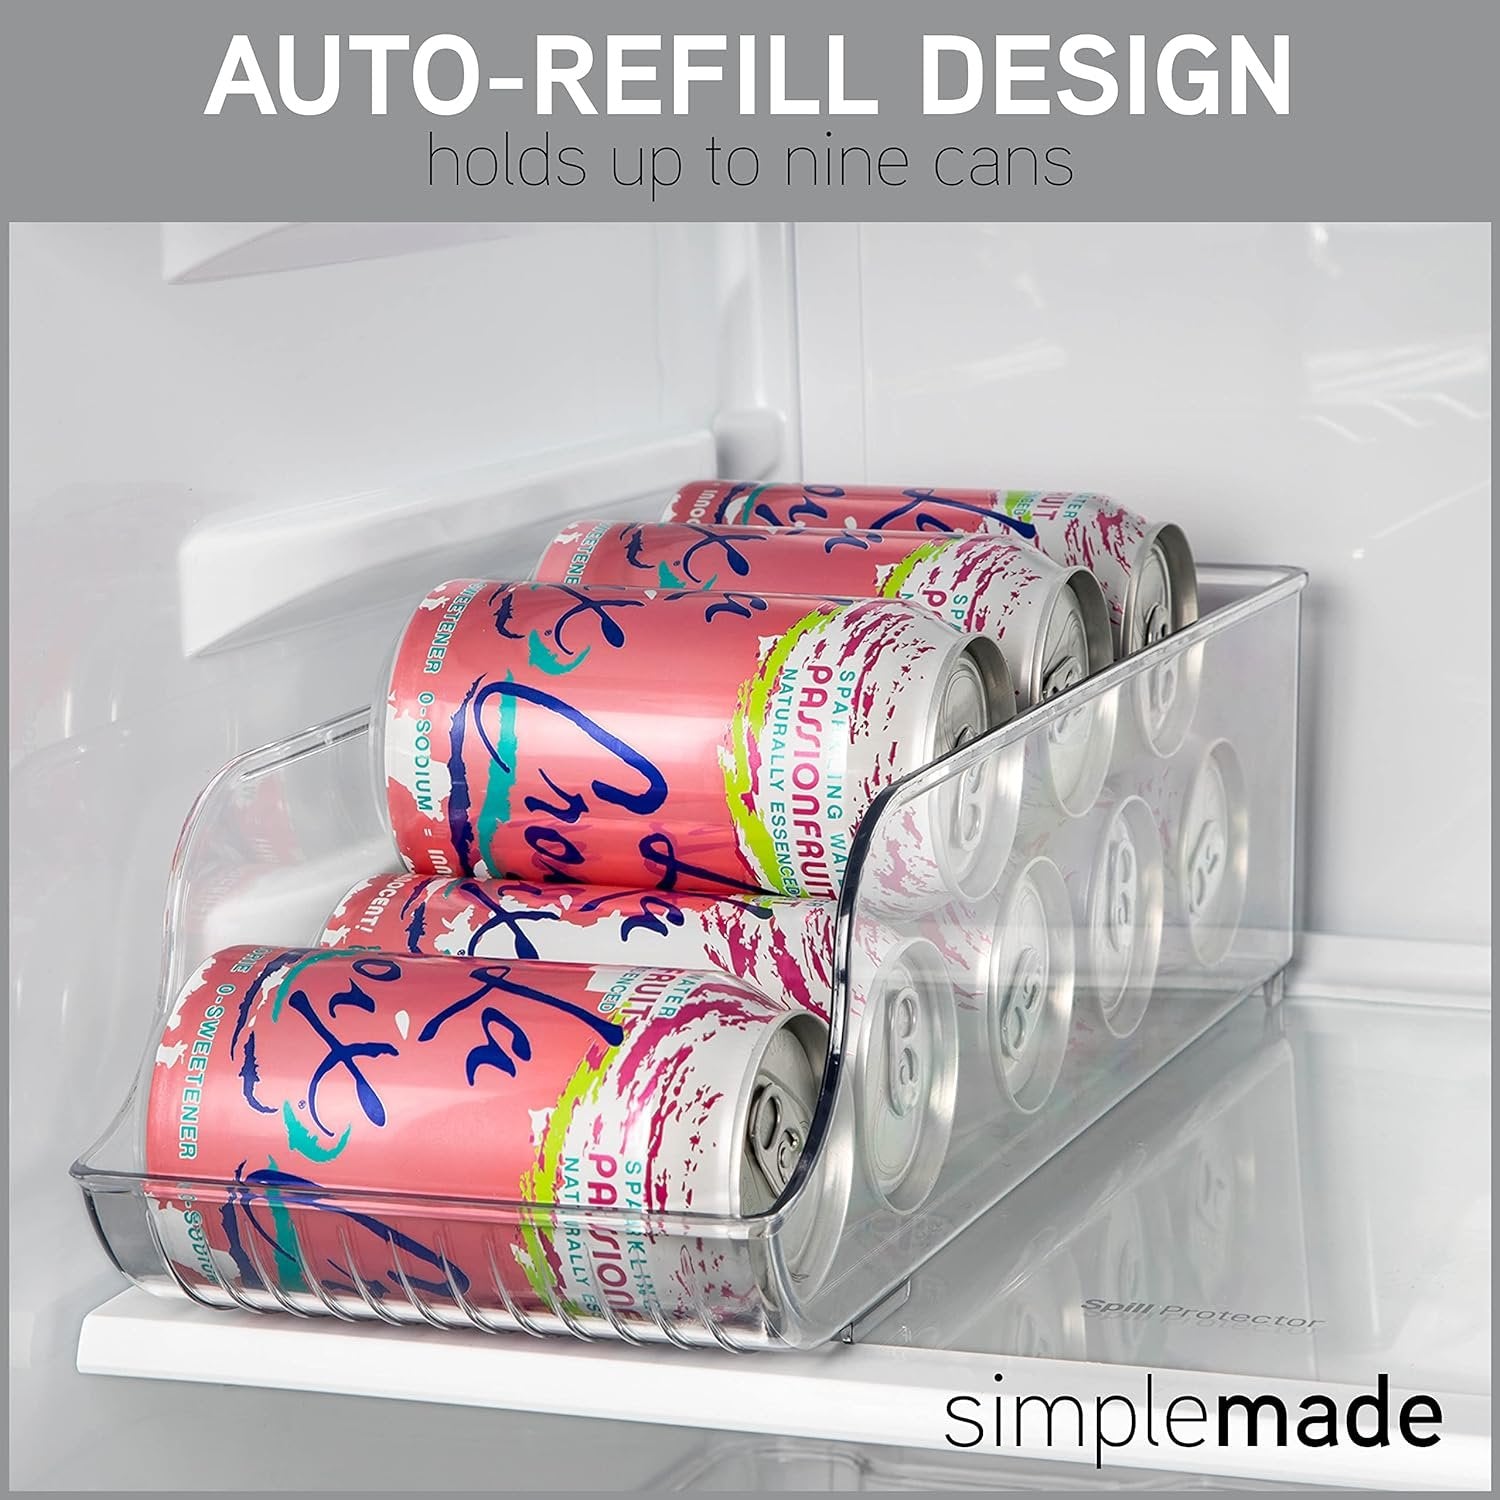 SIMPLEMADE Drink Container for Refrigerator, Can Dispenser Rack, Clear Pop Holder for Refrigerator and Freezer, Multipurpose Pop Can Organizer for Kitchen, Office, Bathroom